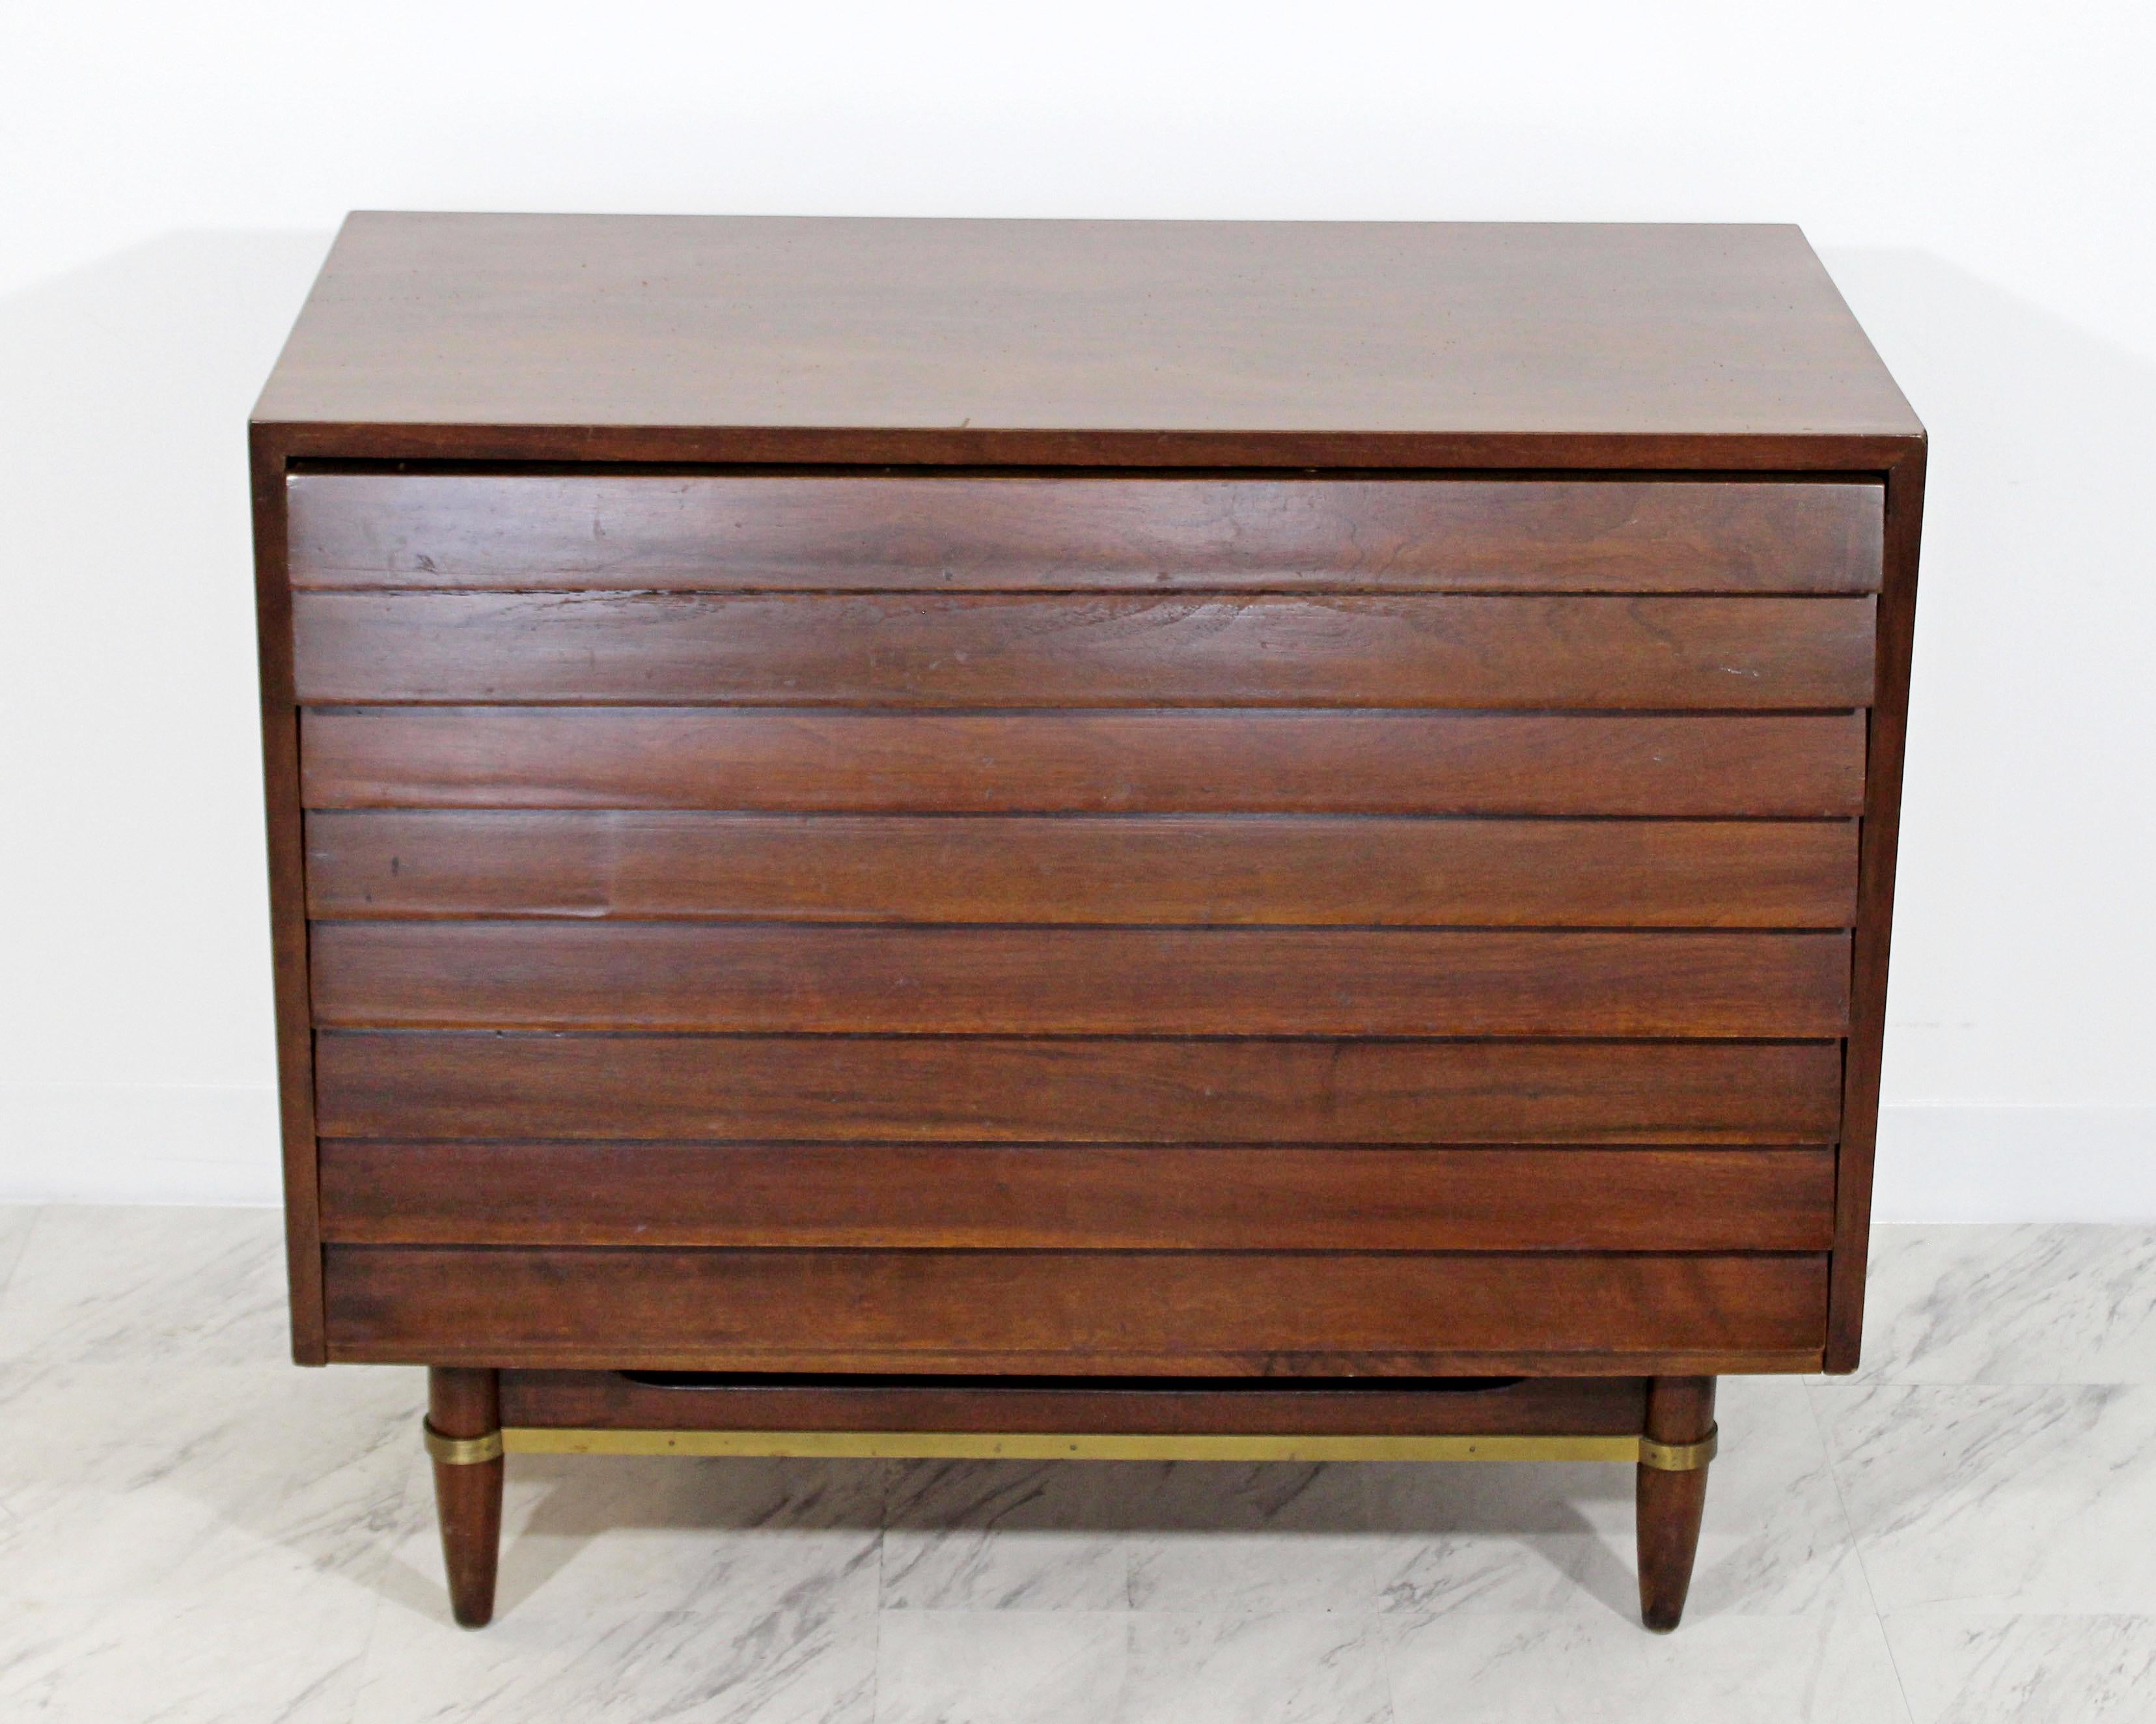 For your consideration is a gorgeous, walnut dresser, with three drawers, by Merton Gershun for American of Martinsville, circa the 1950s. In very good vintage condition. The dimensions of each are 22